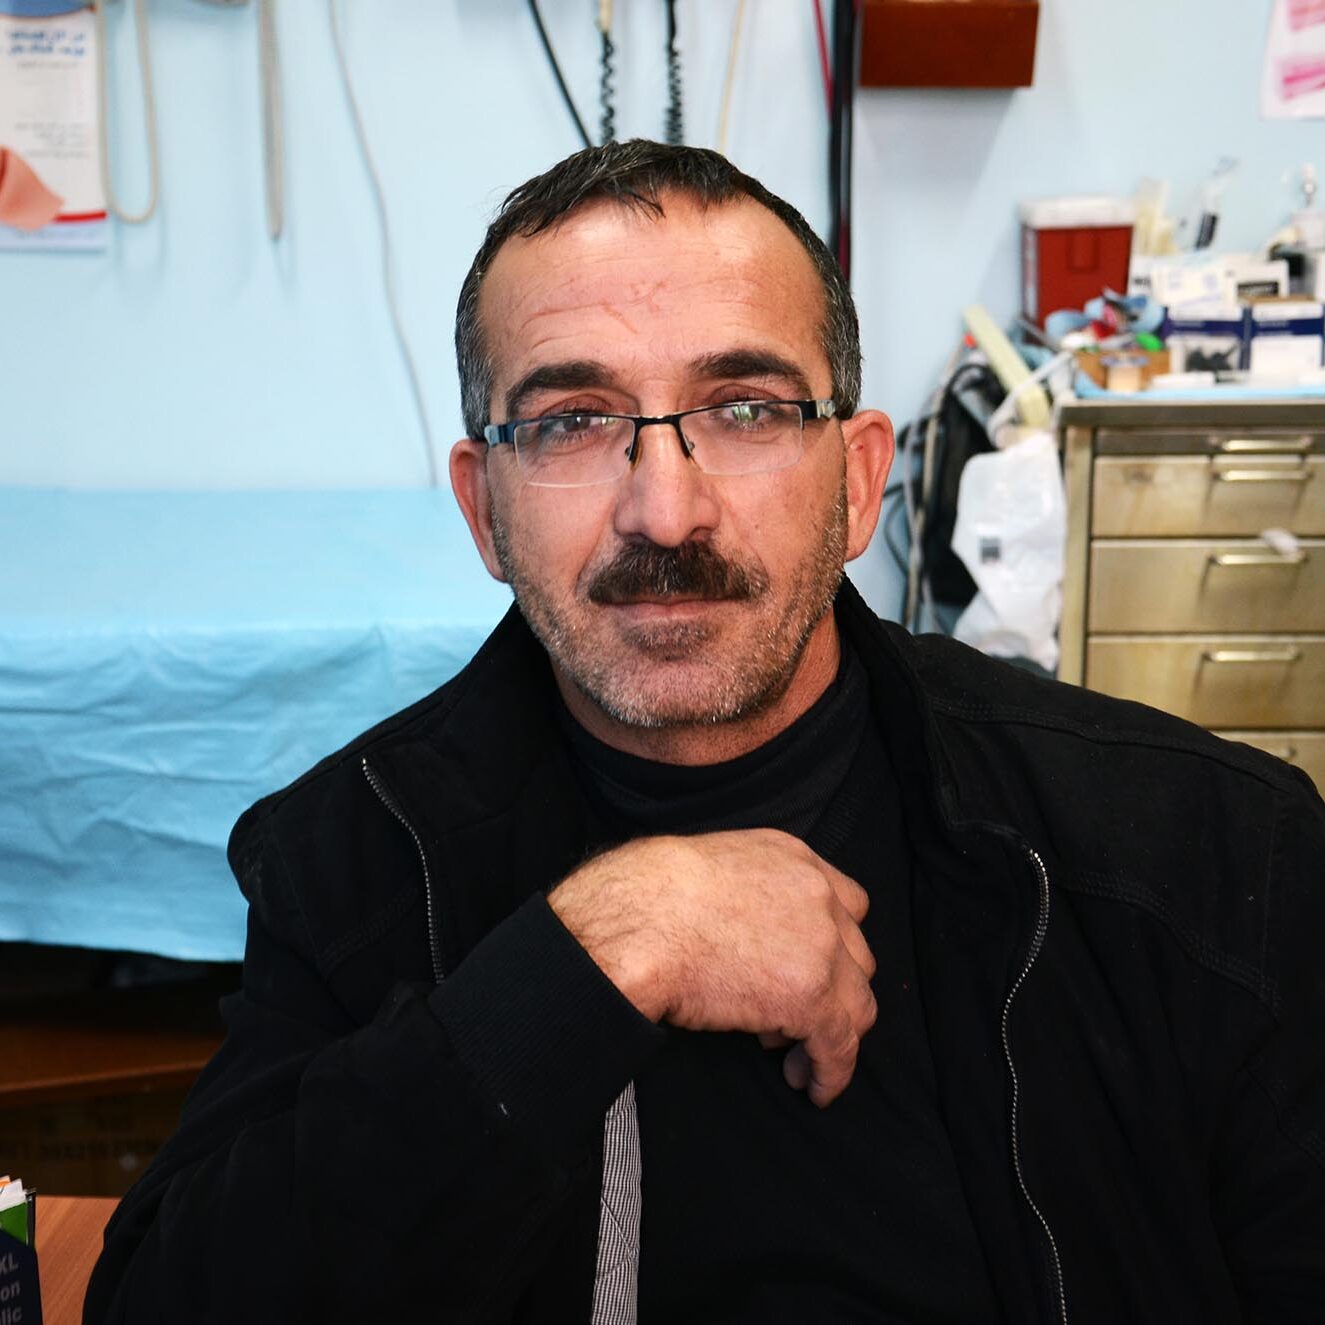 Sufian Shweiki, a 47-year-old father of seven children, works in the central heating business in Hebron.